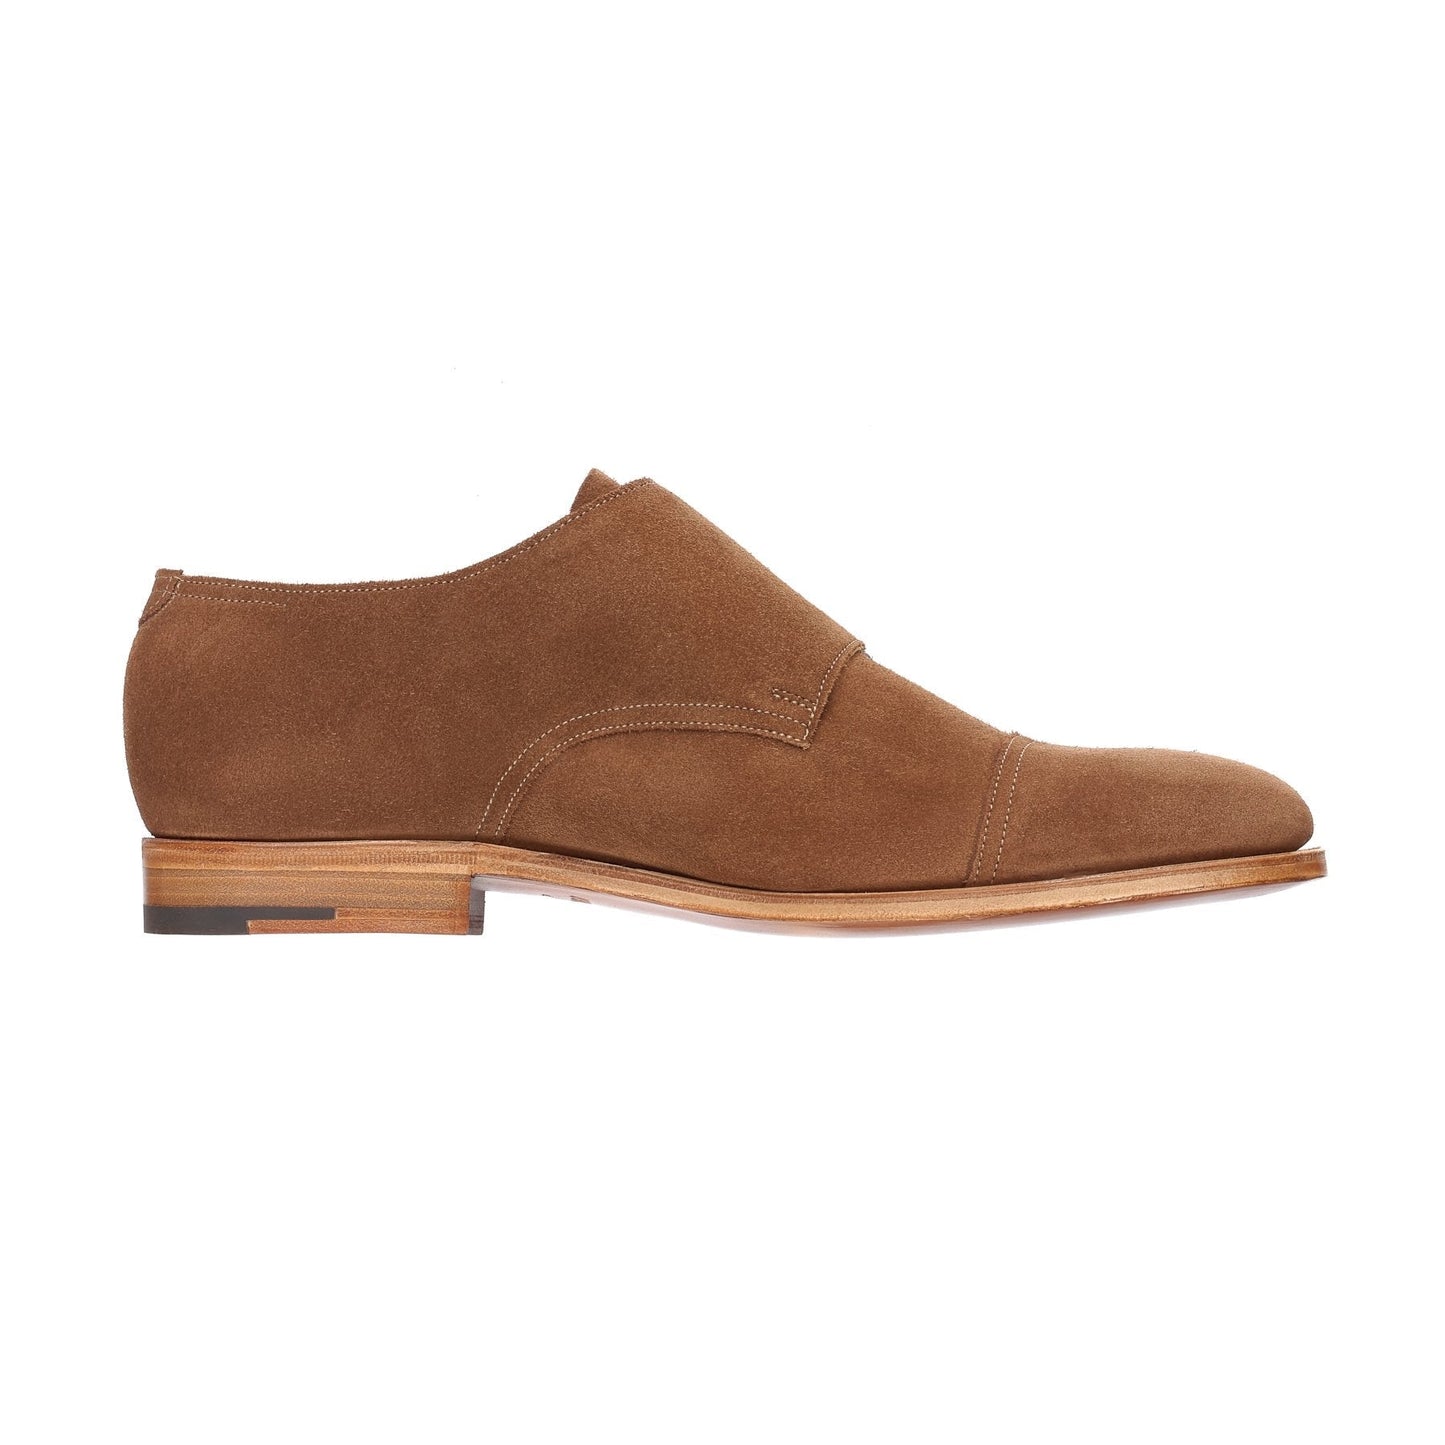 John Lobb "William" Suede Double-Monk Shoes with Hand-Stitched Cap Toe in Light Brown - SARTALE